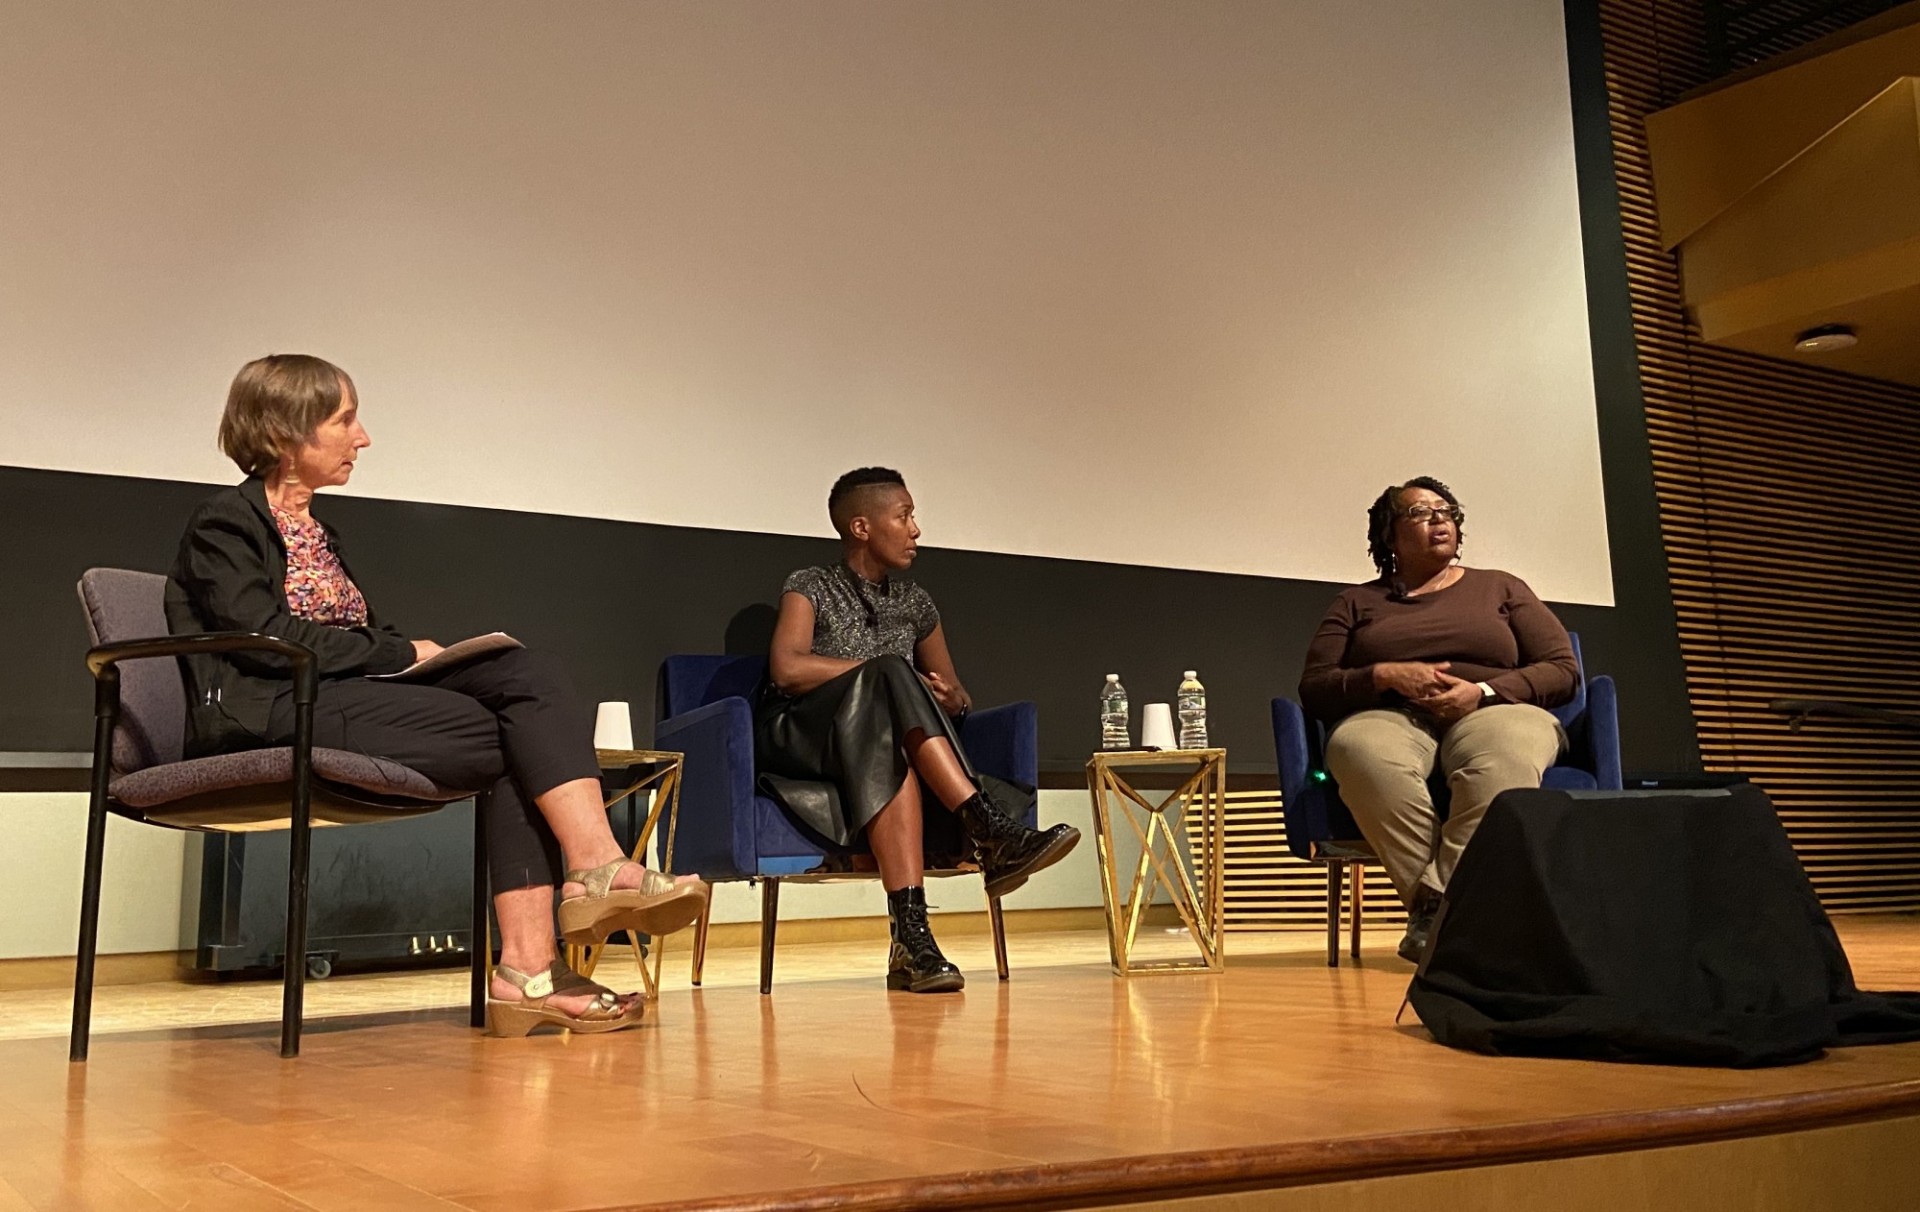 A conversation with Amandine Gay, filmmaker of A Story of One’s Own (in the center), and Joyce McMillan, founder of Just Making A Change For Families (on the right), moderated by Shanny Peer, director of the Maison Française (on the left).